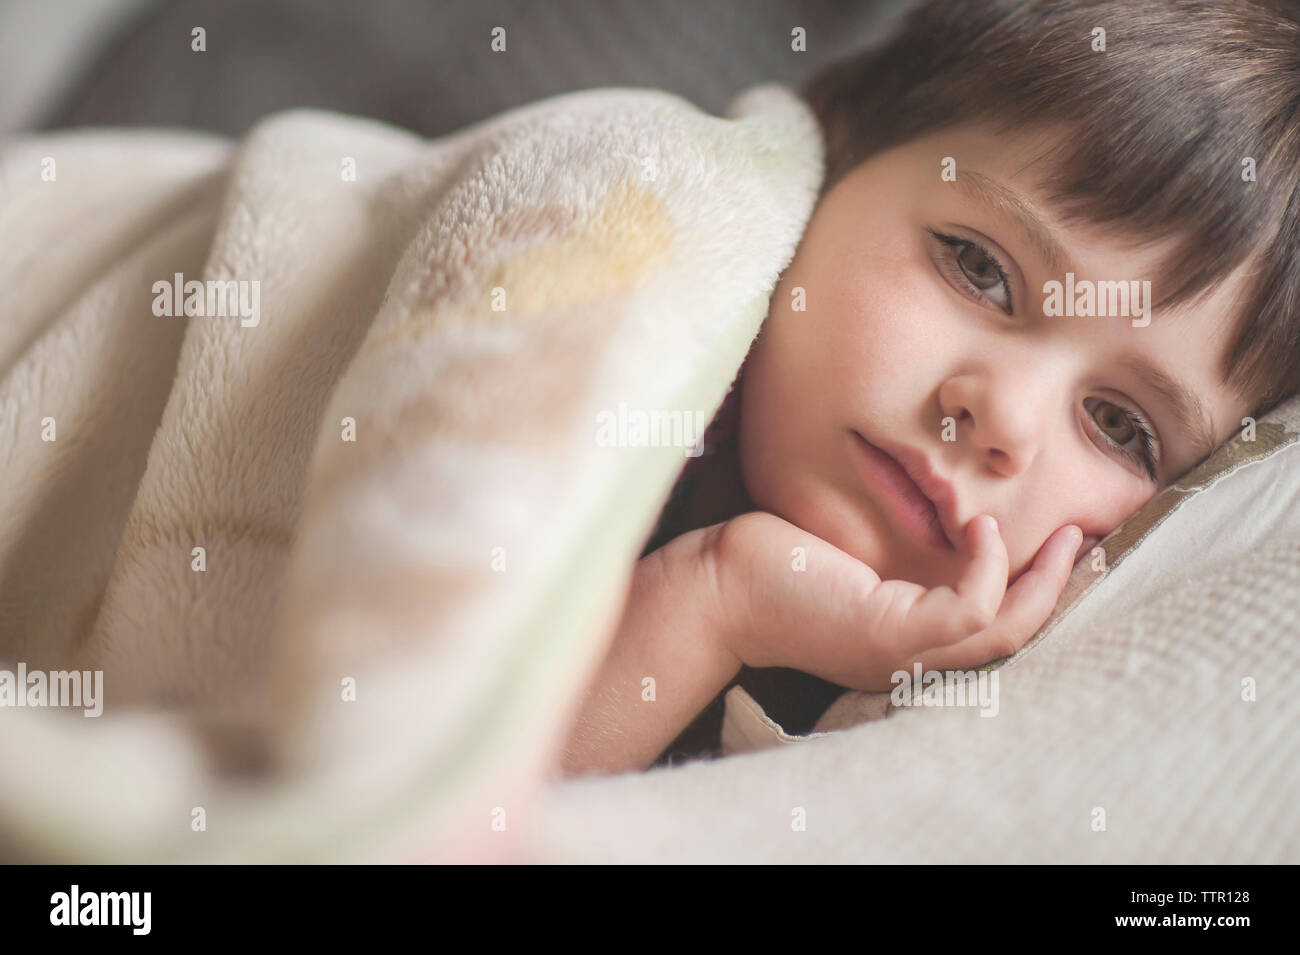 Close-up portrait of boy lying in bed at home Banque D'Images